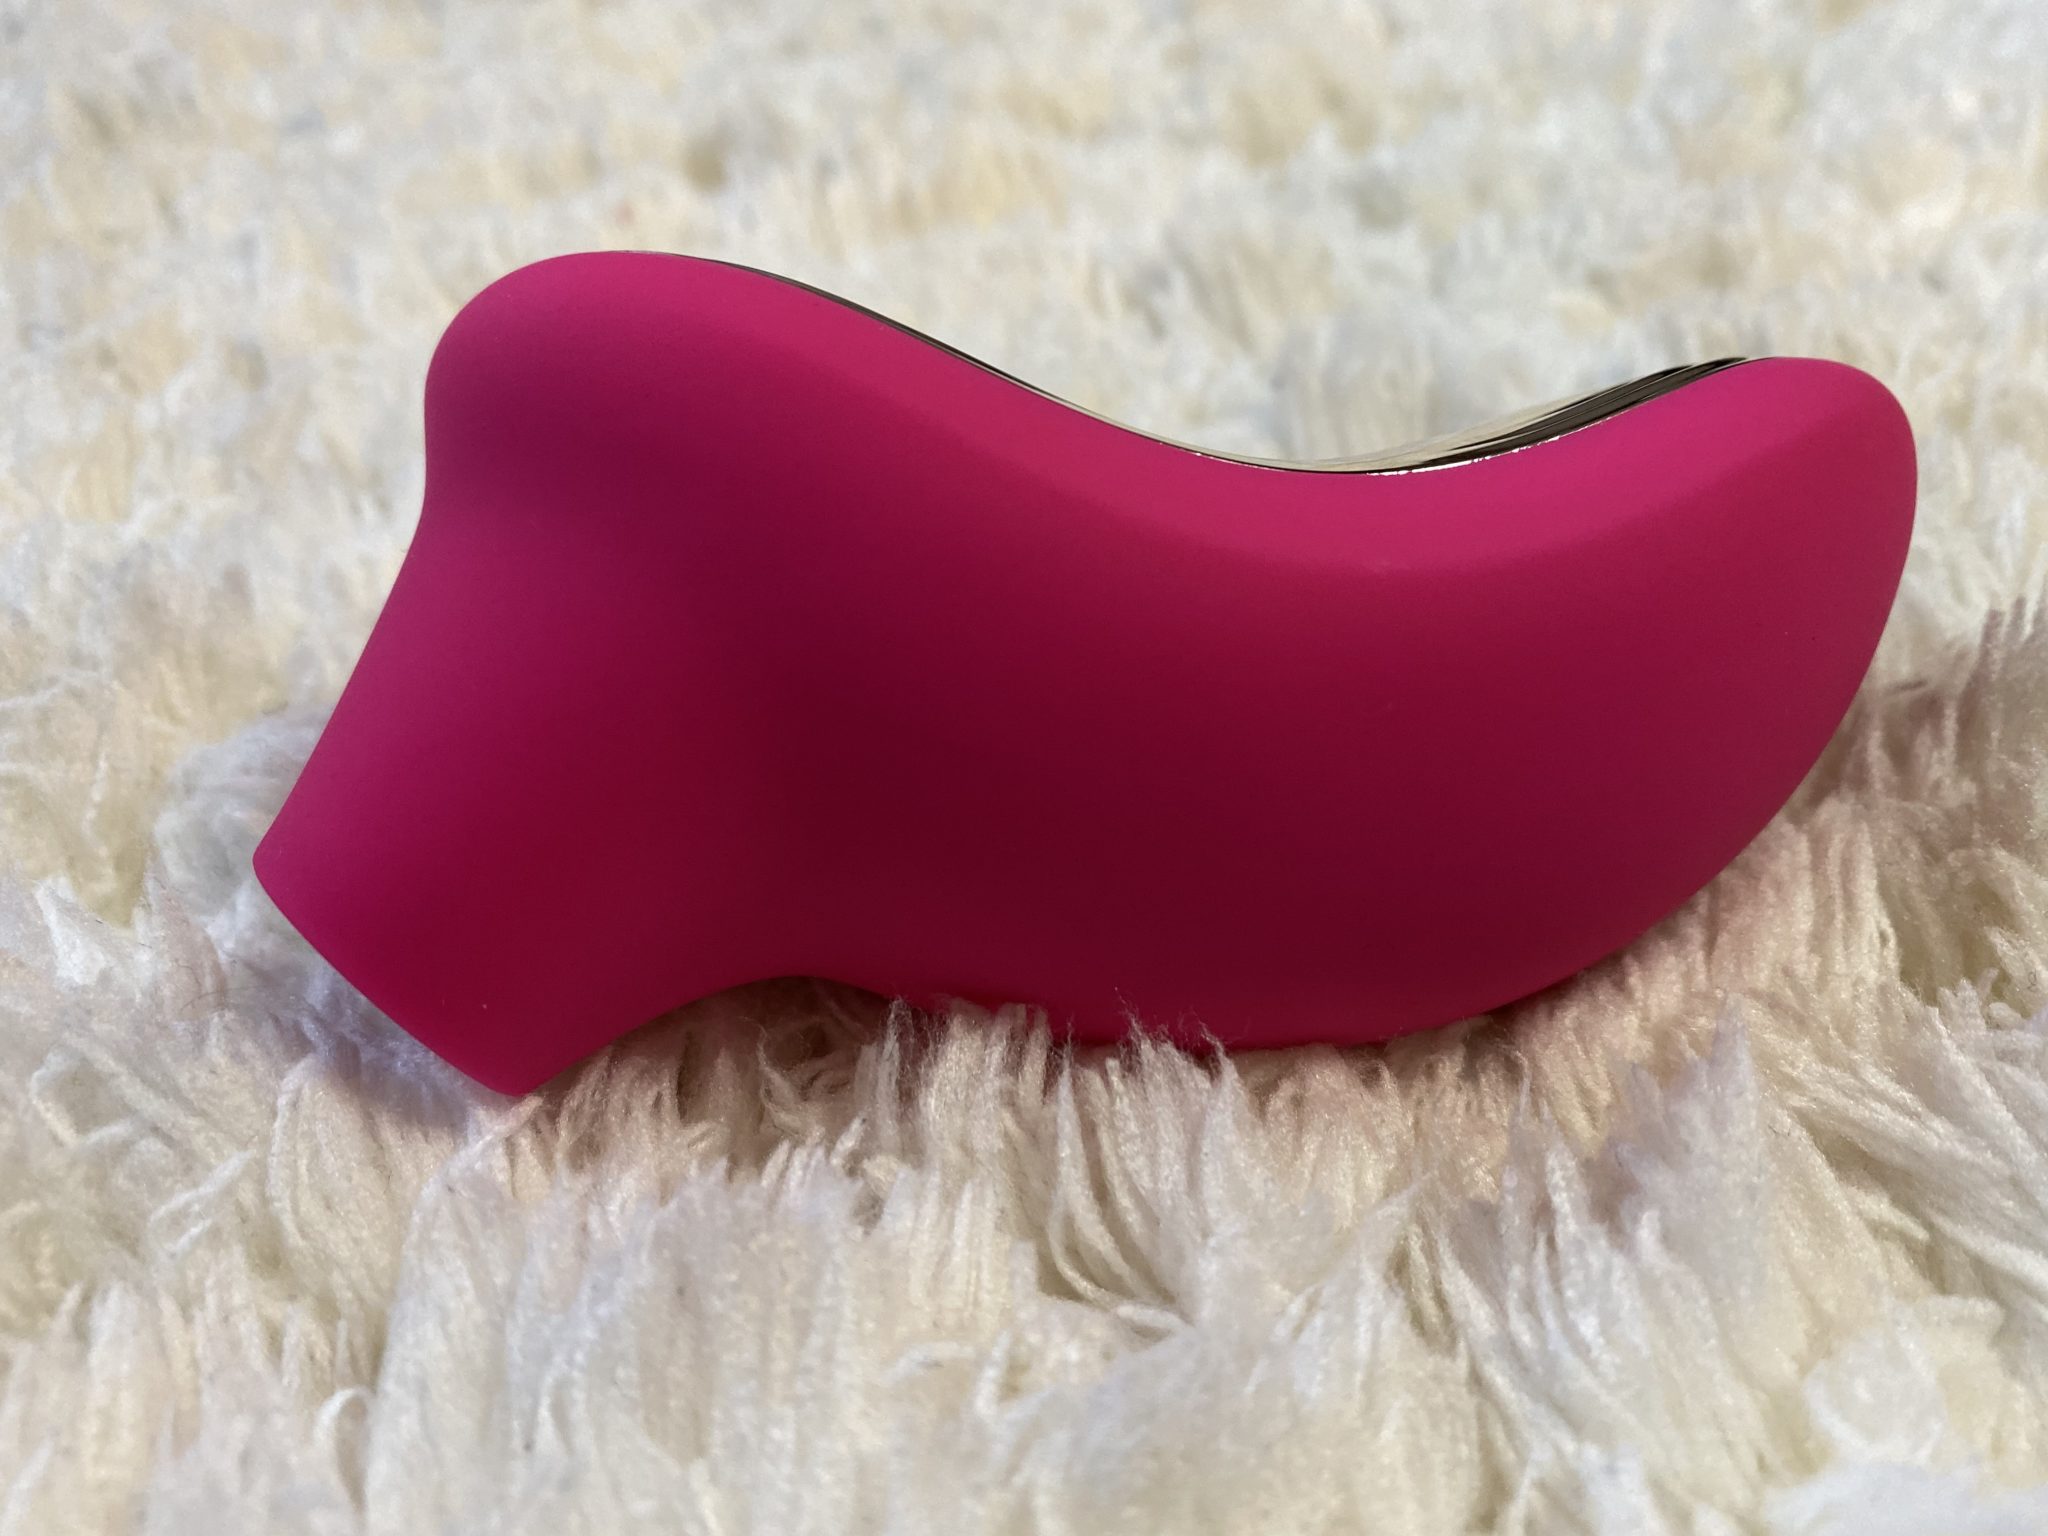 sona 2 cruise review sex toy 